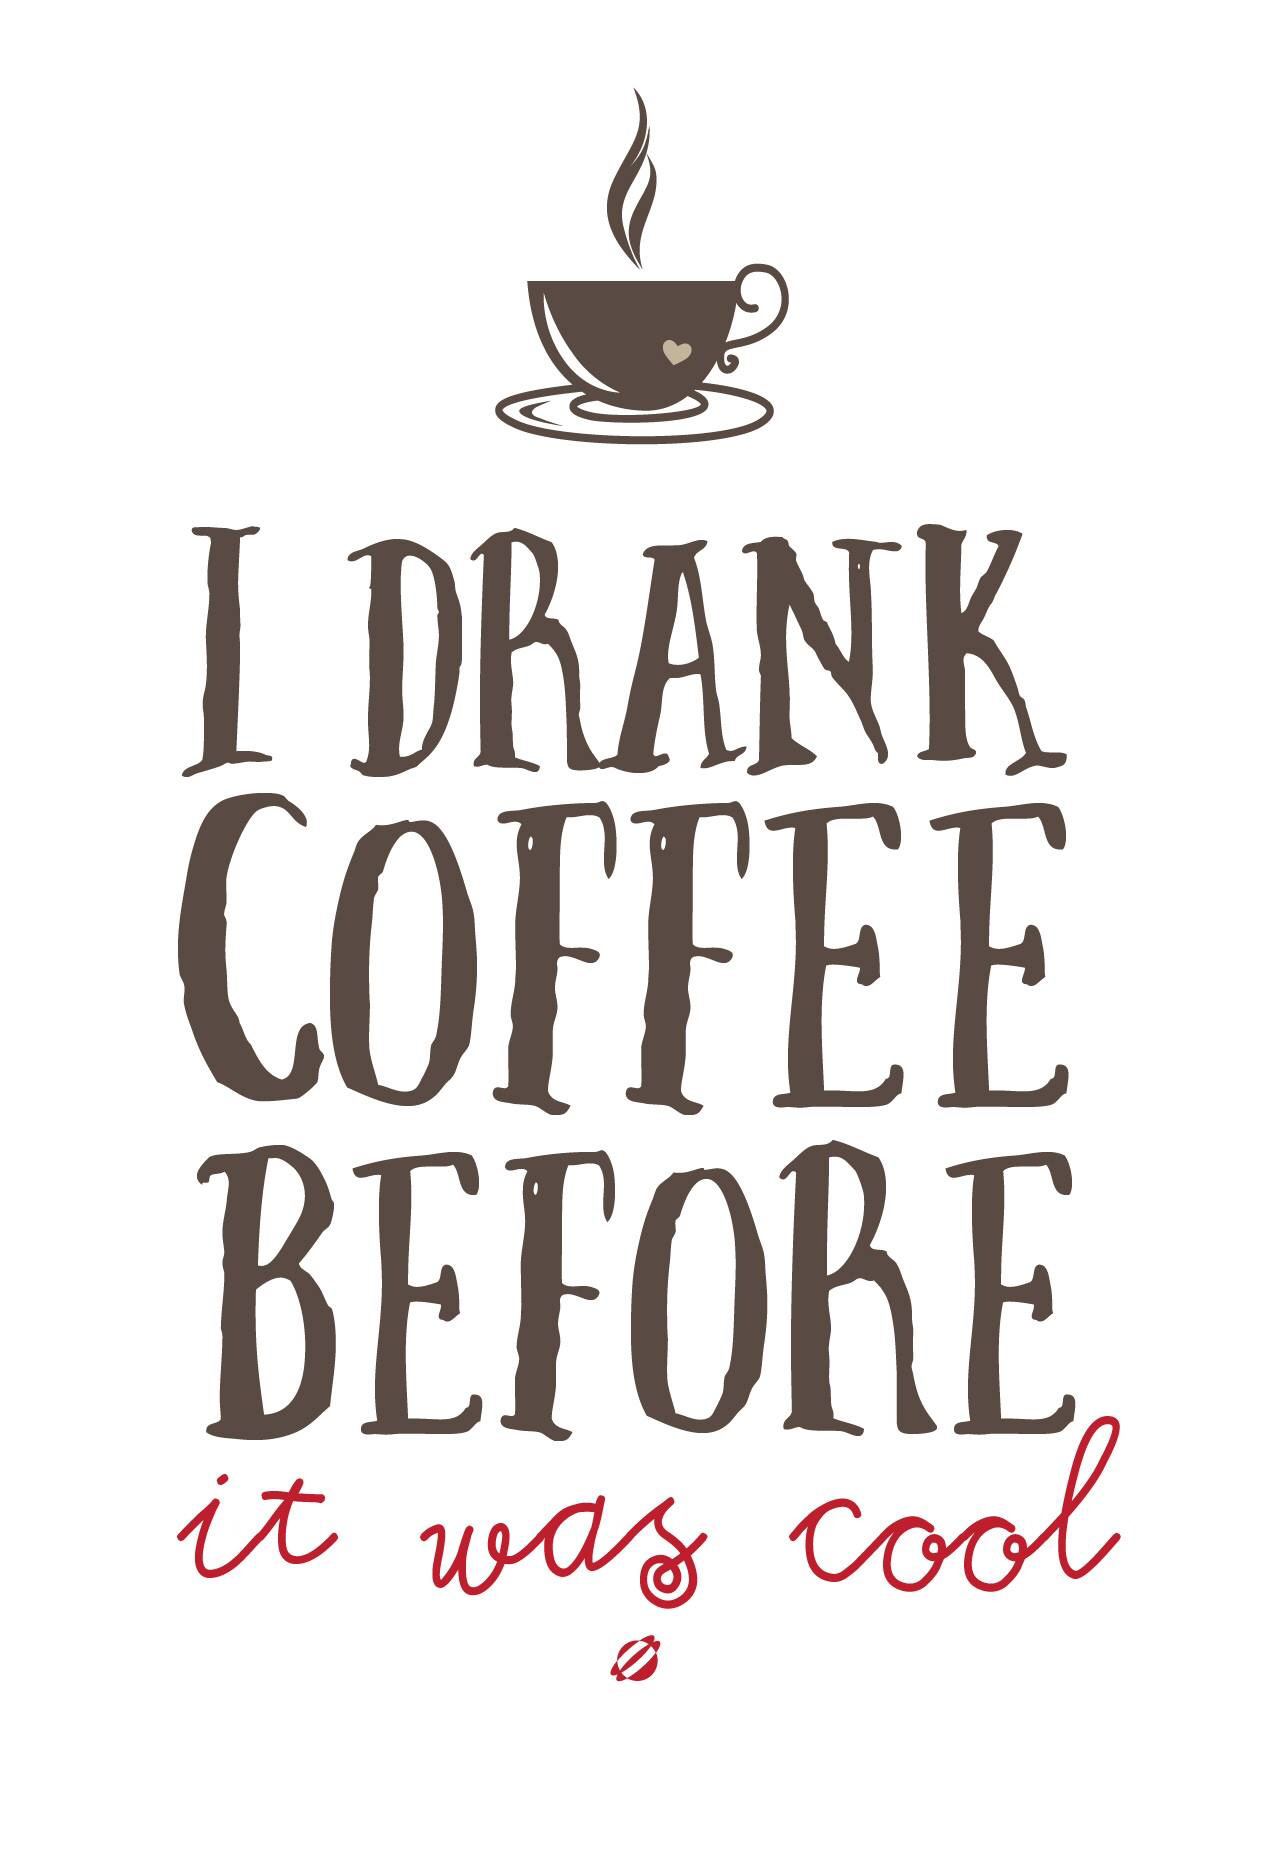 Funny Quotes About Drinking Coffee. QuotesGram